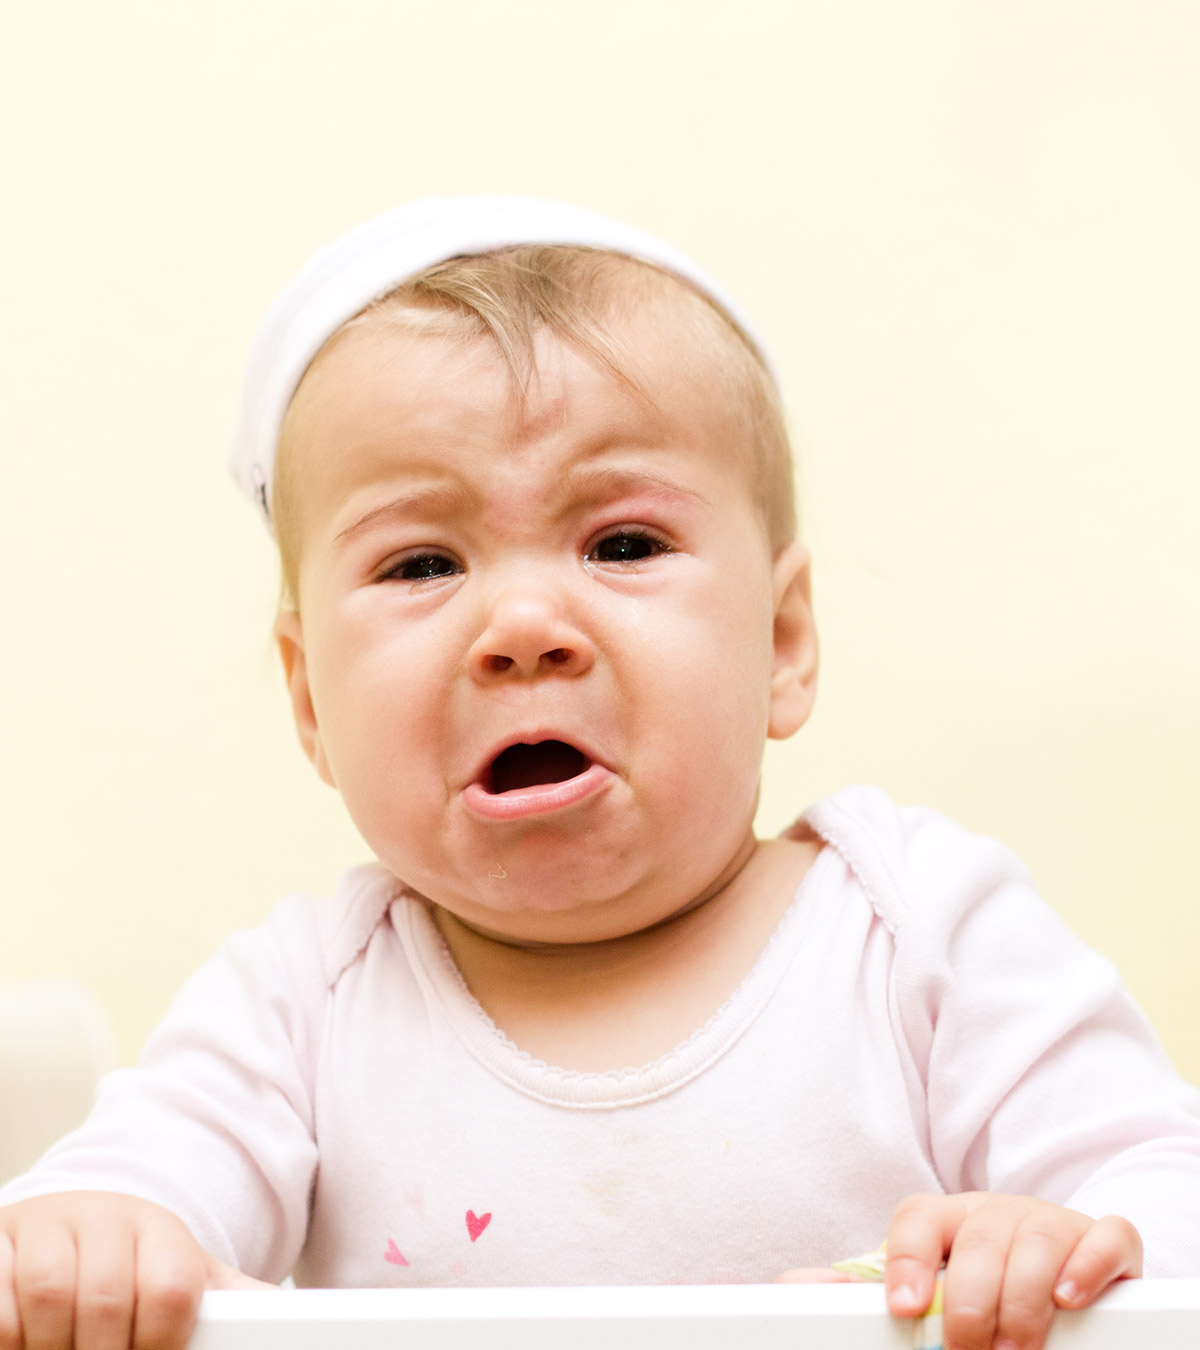 Stress In Babies: Symptoms, Causes, And Prevention